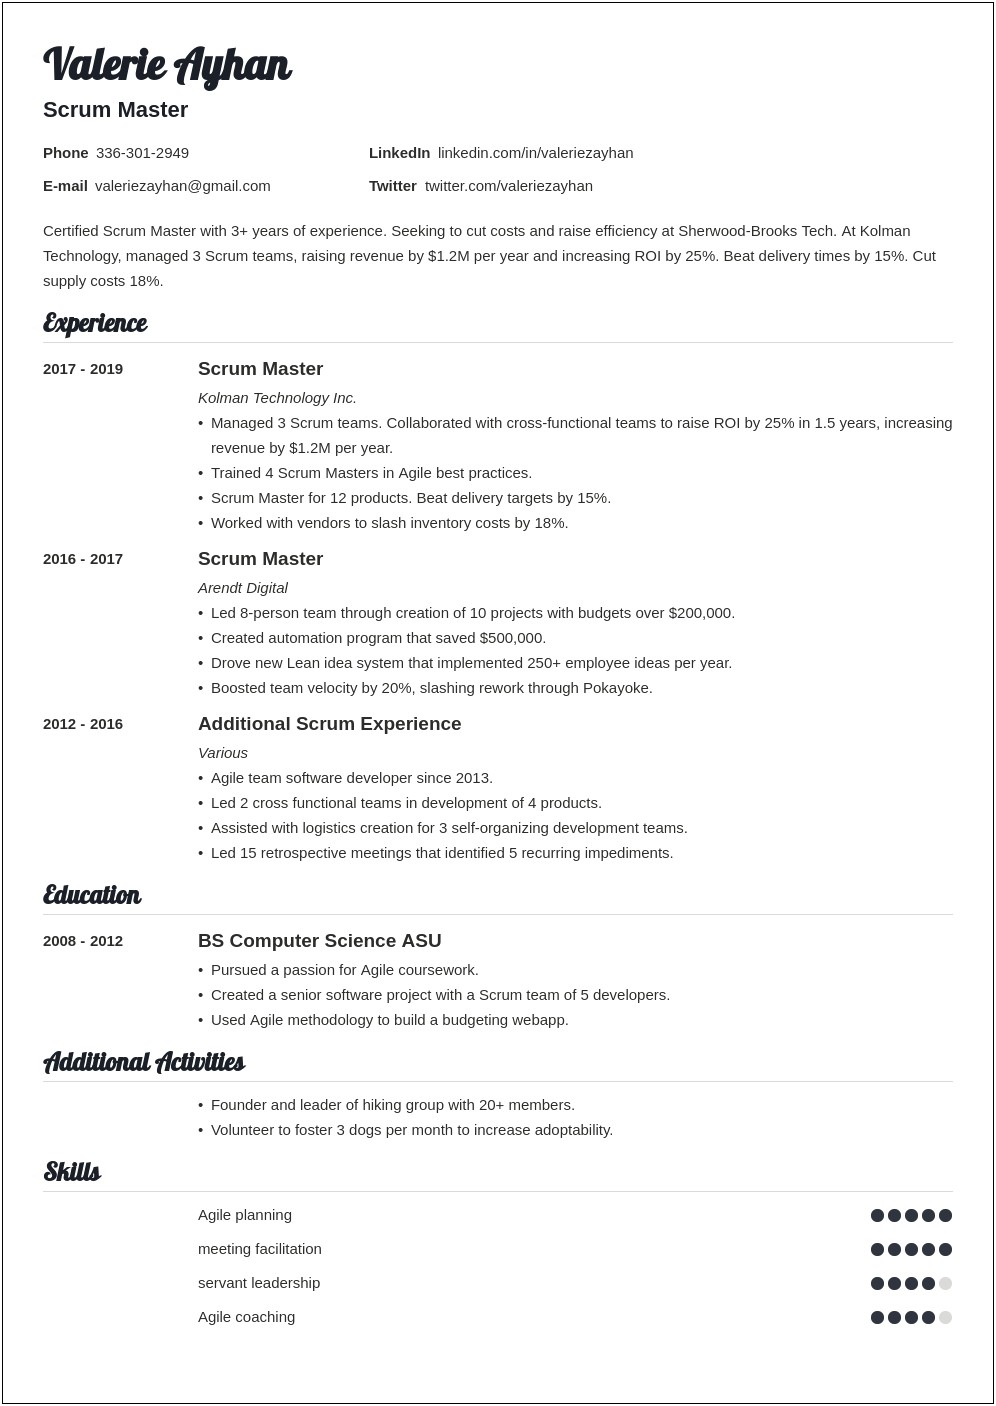 Where To Add Agile Experience In Resume